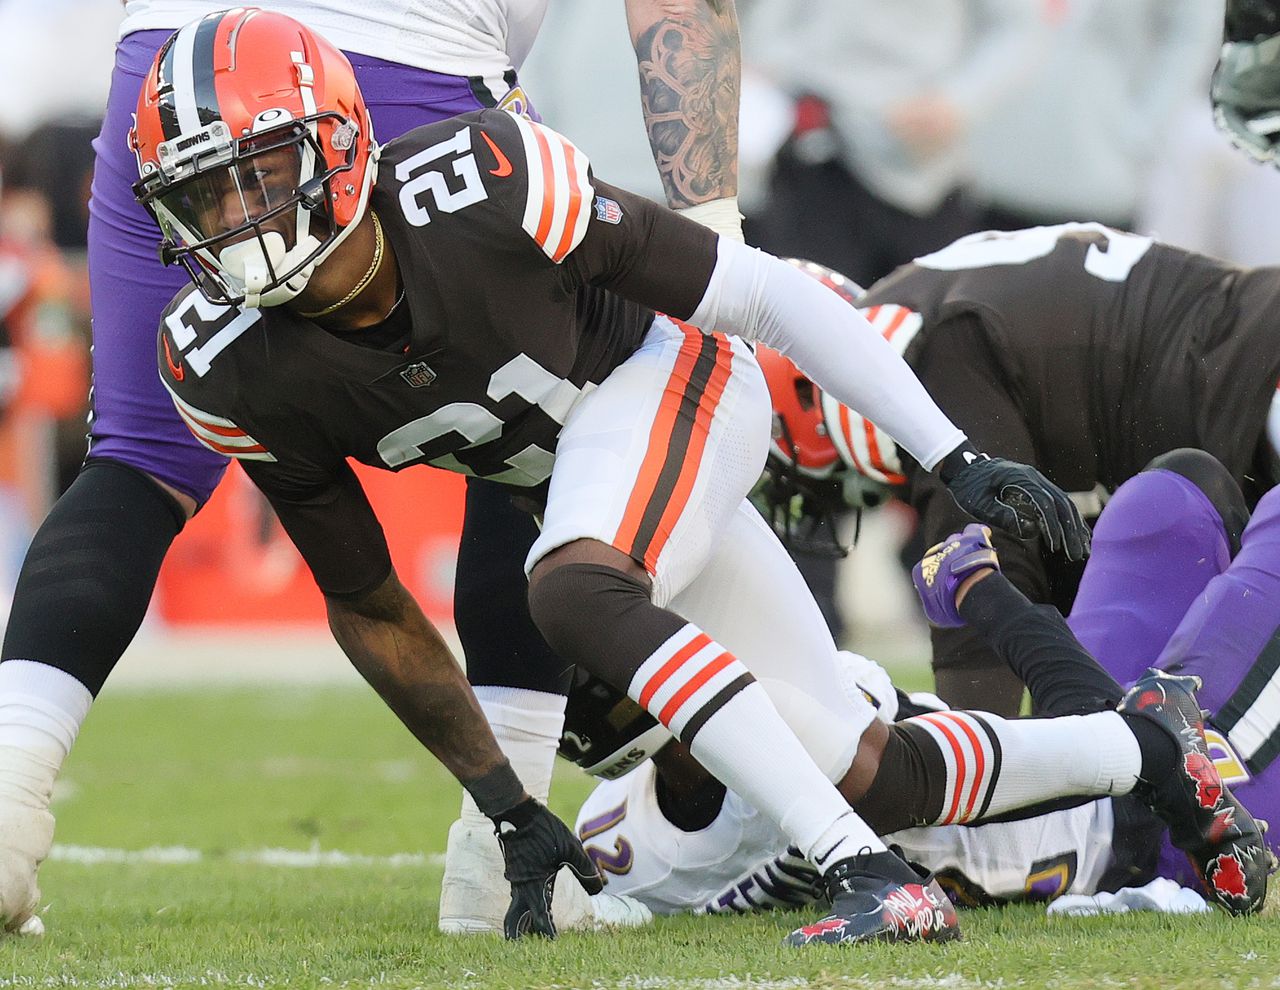 Browns extension of Denzel Ward means core is locked up, contention window is wide open: Dan Labbe